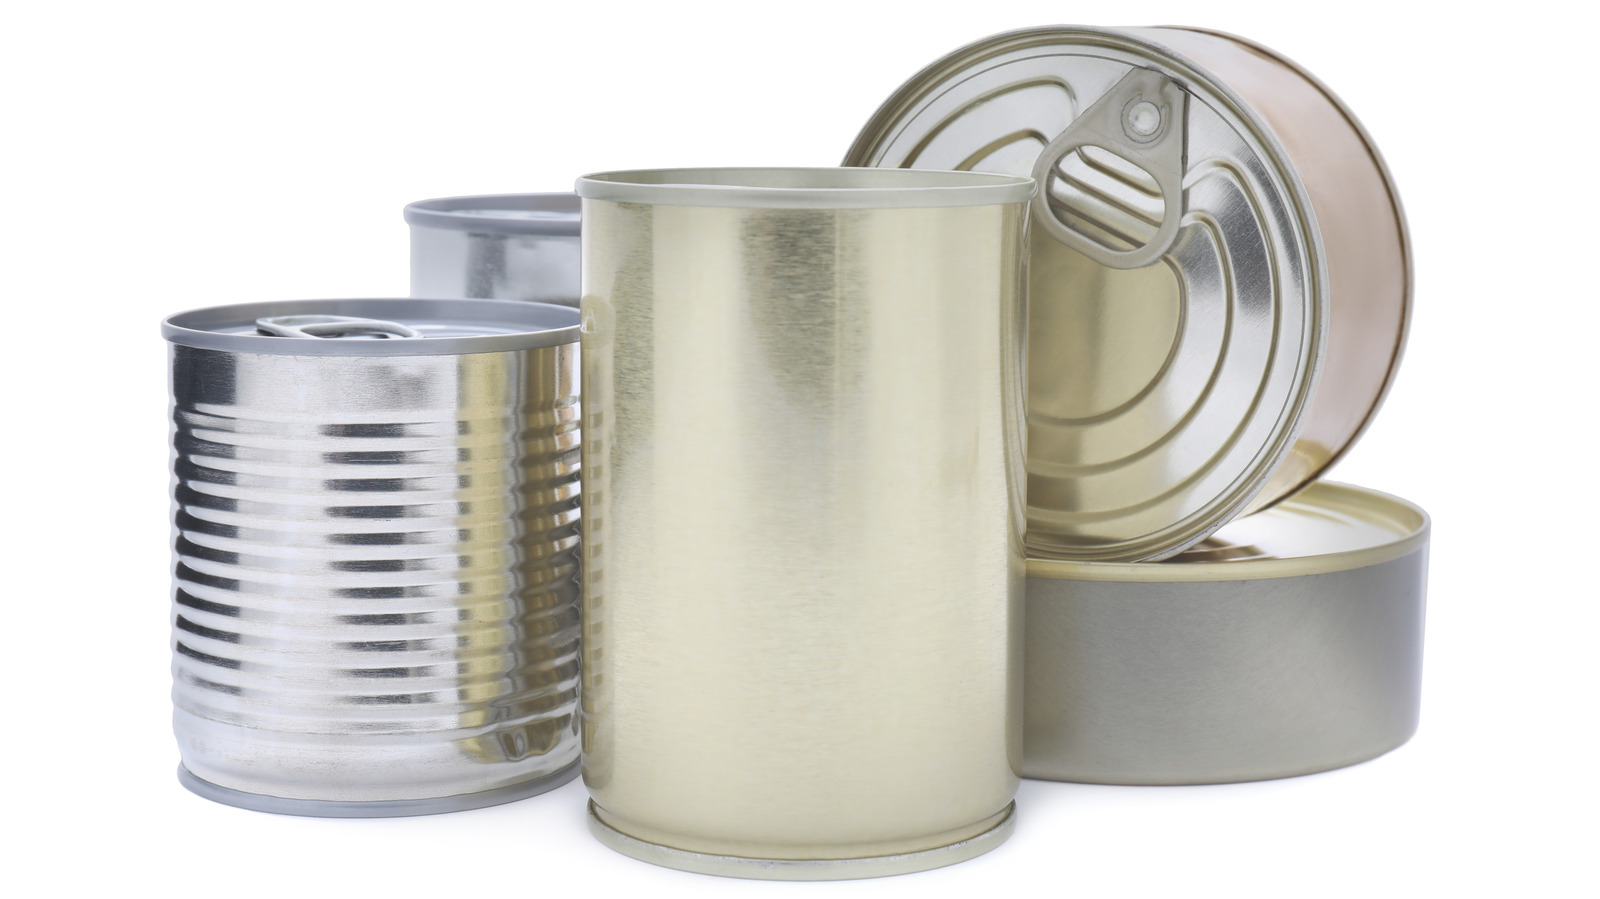 https://www.thedailymeal.com/img/gallery/the-science-behind-why-some-foods-are-canned-in-tin-vs-aluminum/l-intro-1695660932.jpg